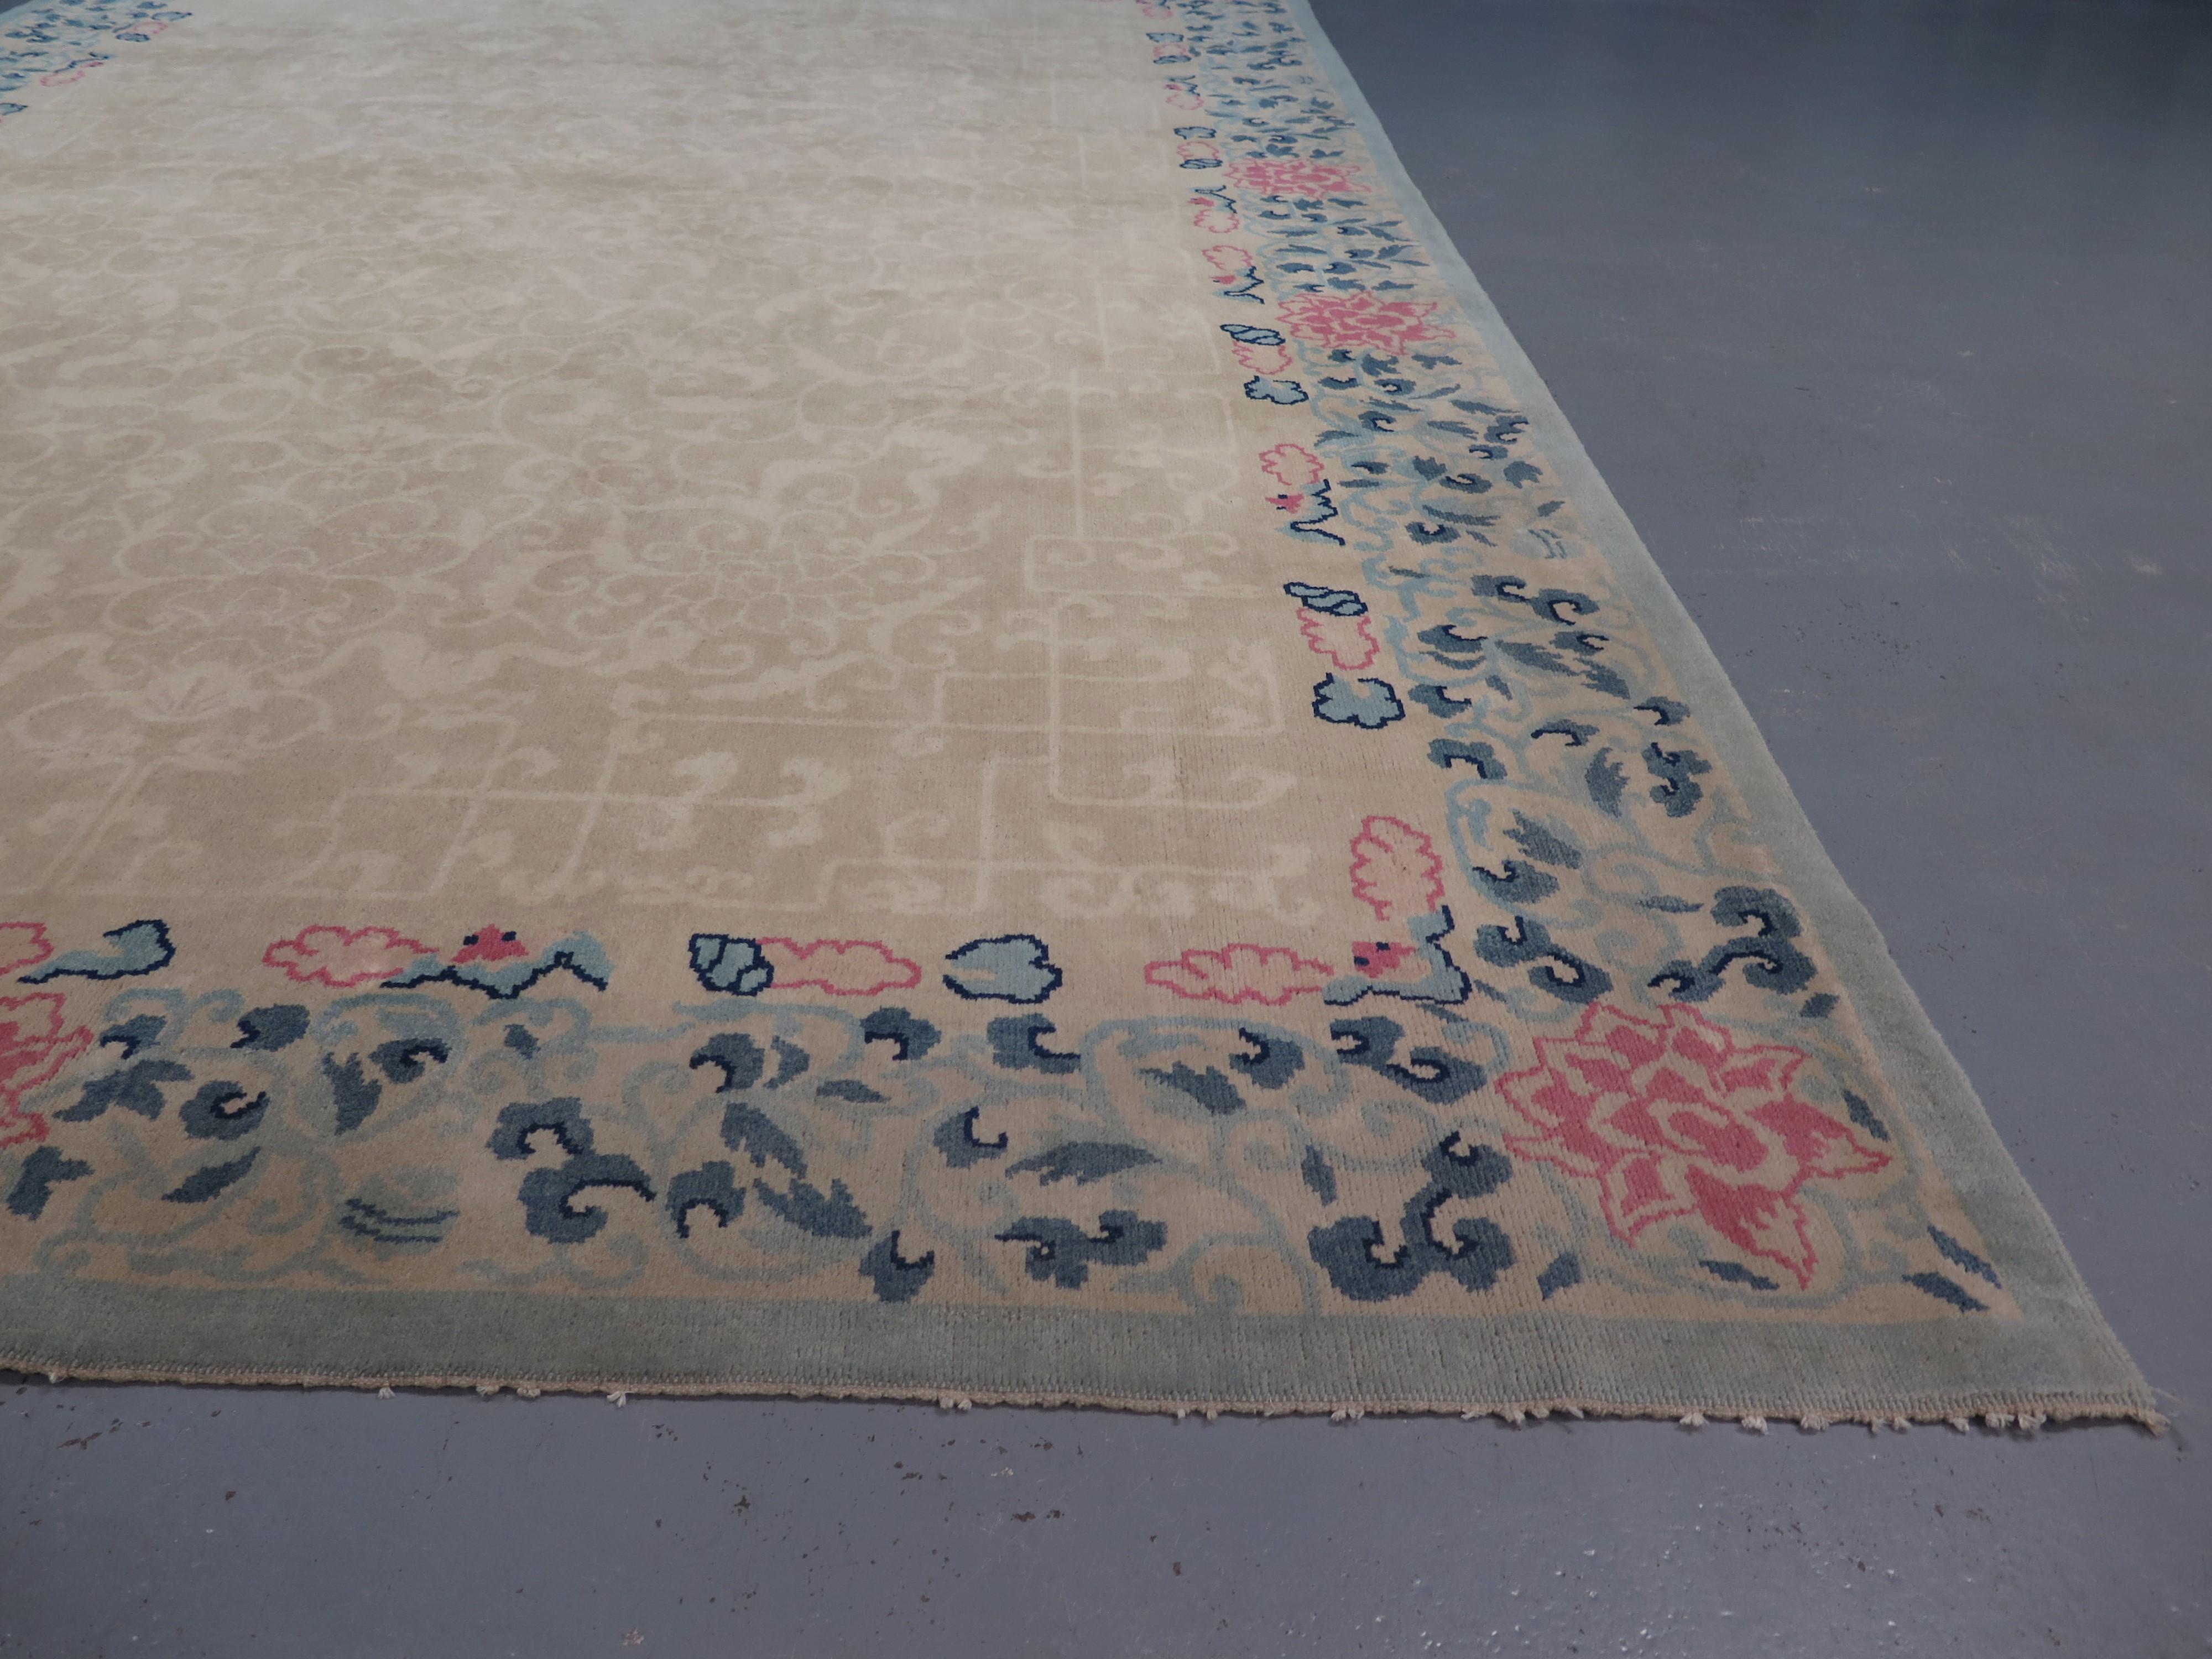 Pioneered by Walter Nichols, an American in China whose workshops were active from 1924 into the 1930s, Chinese Art Deco carpets represent a real high point in the history of 20th Century design. These pieces are highly sought after, standing out